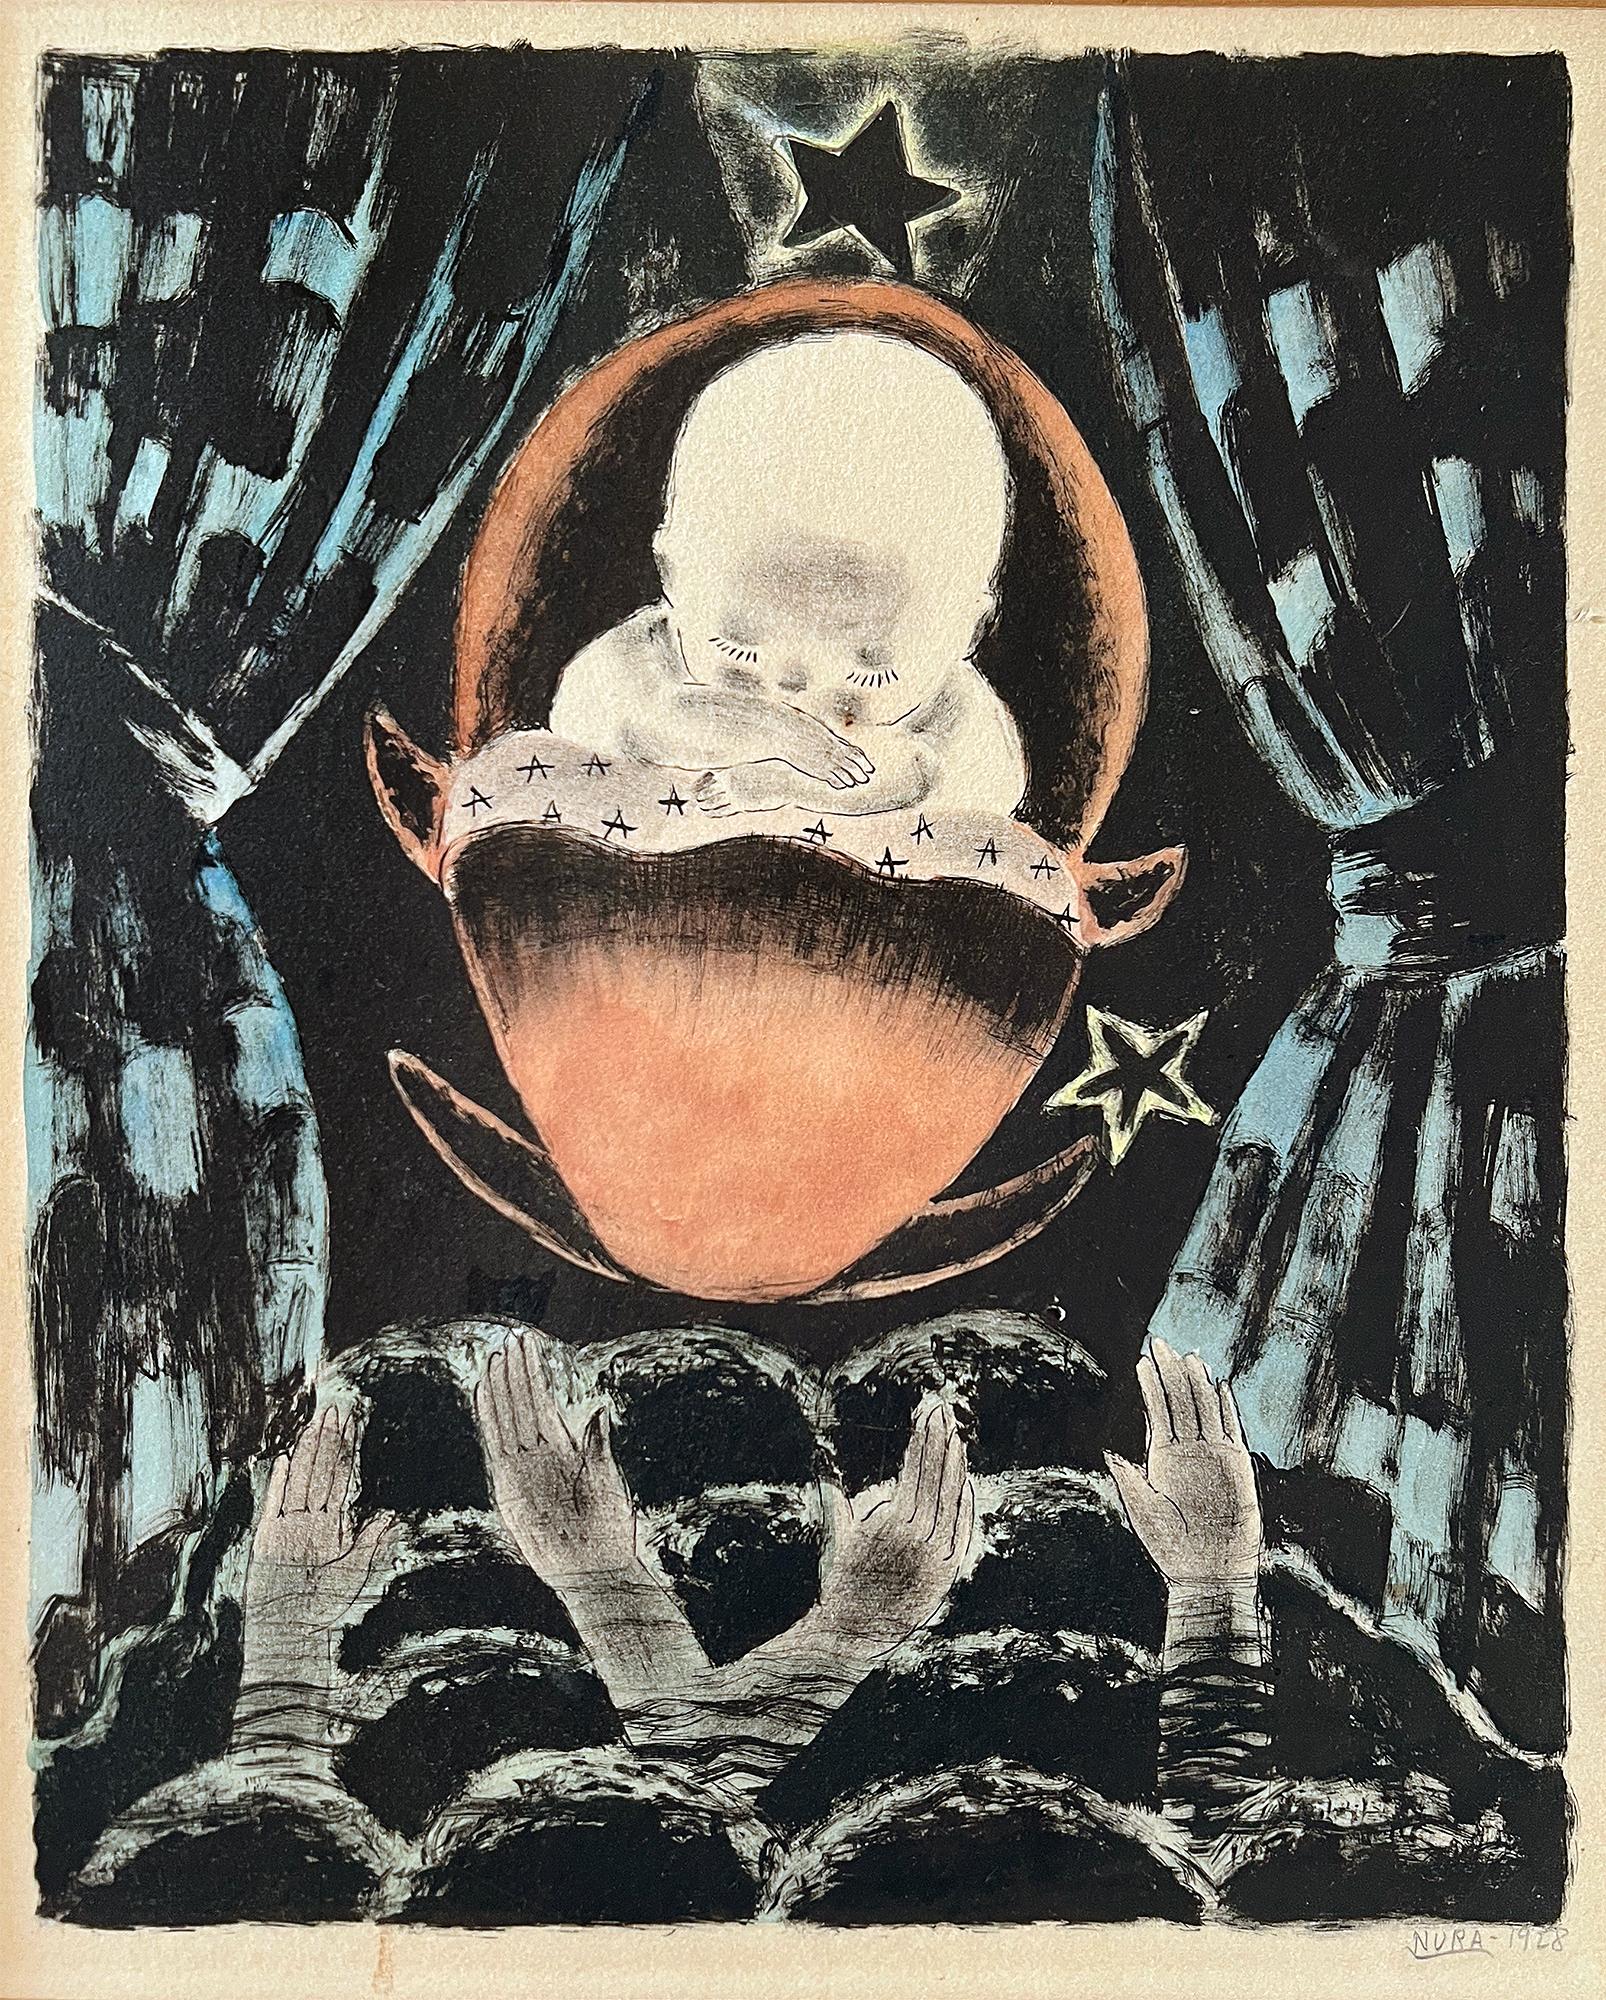 Nura Ulreich Figurative Print - Art Deco - Surreal  Baby Among the Stars in a Theater